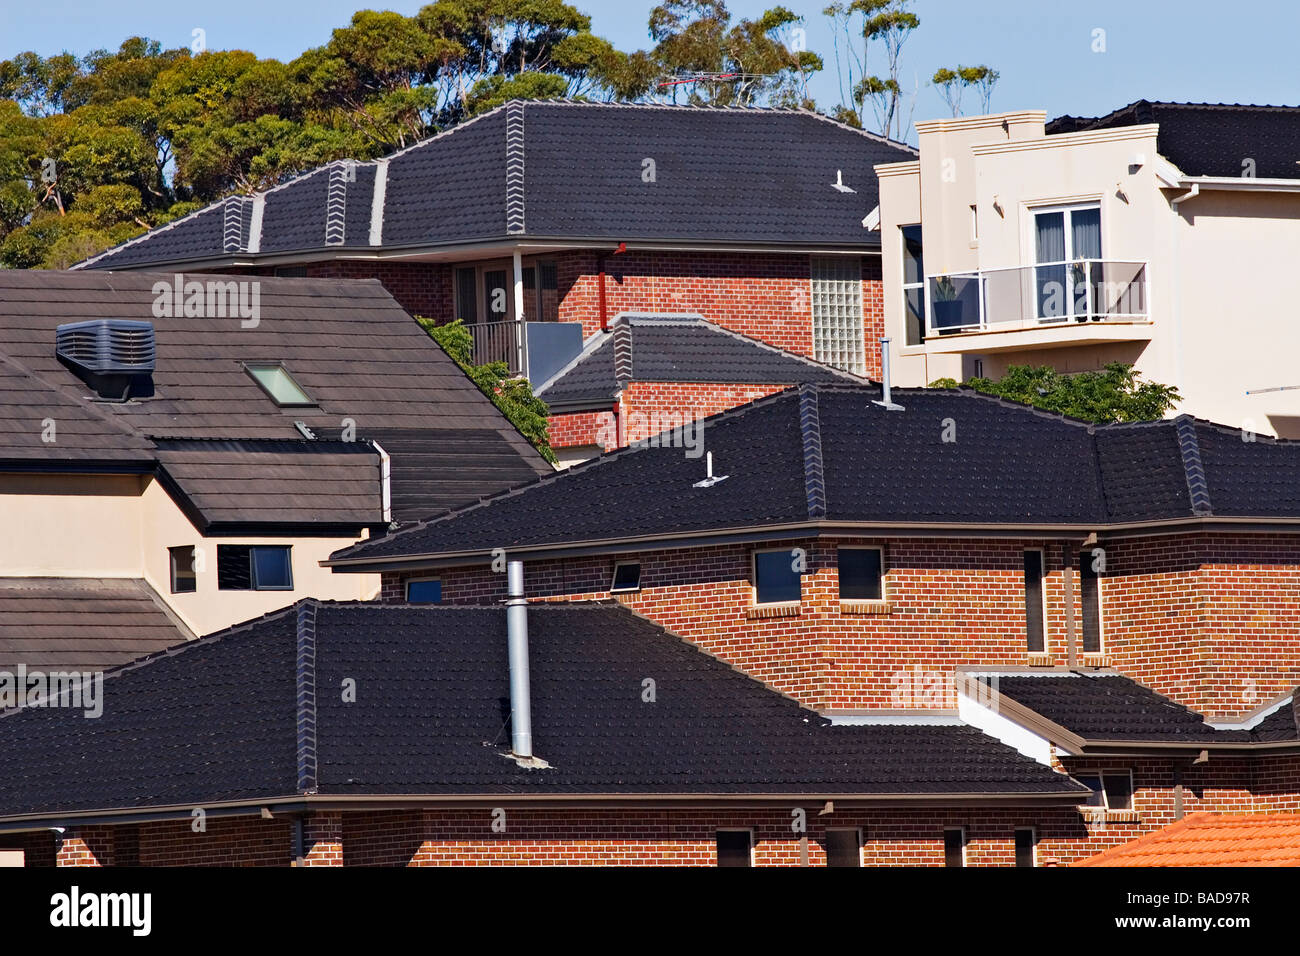 Residential Homes /  Australian homes on an housing estate.The location is Melbourne Victoria Australia. Stock Photo